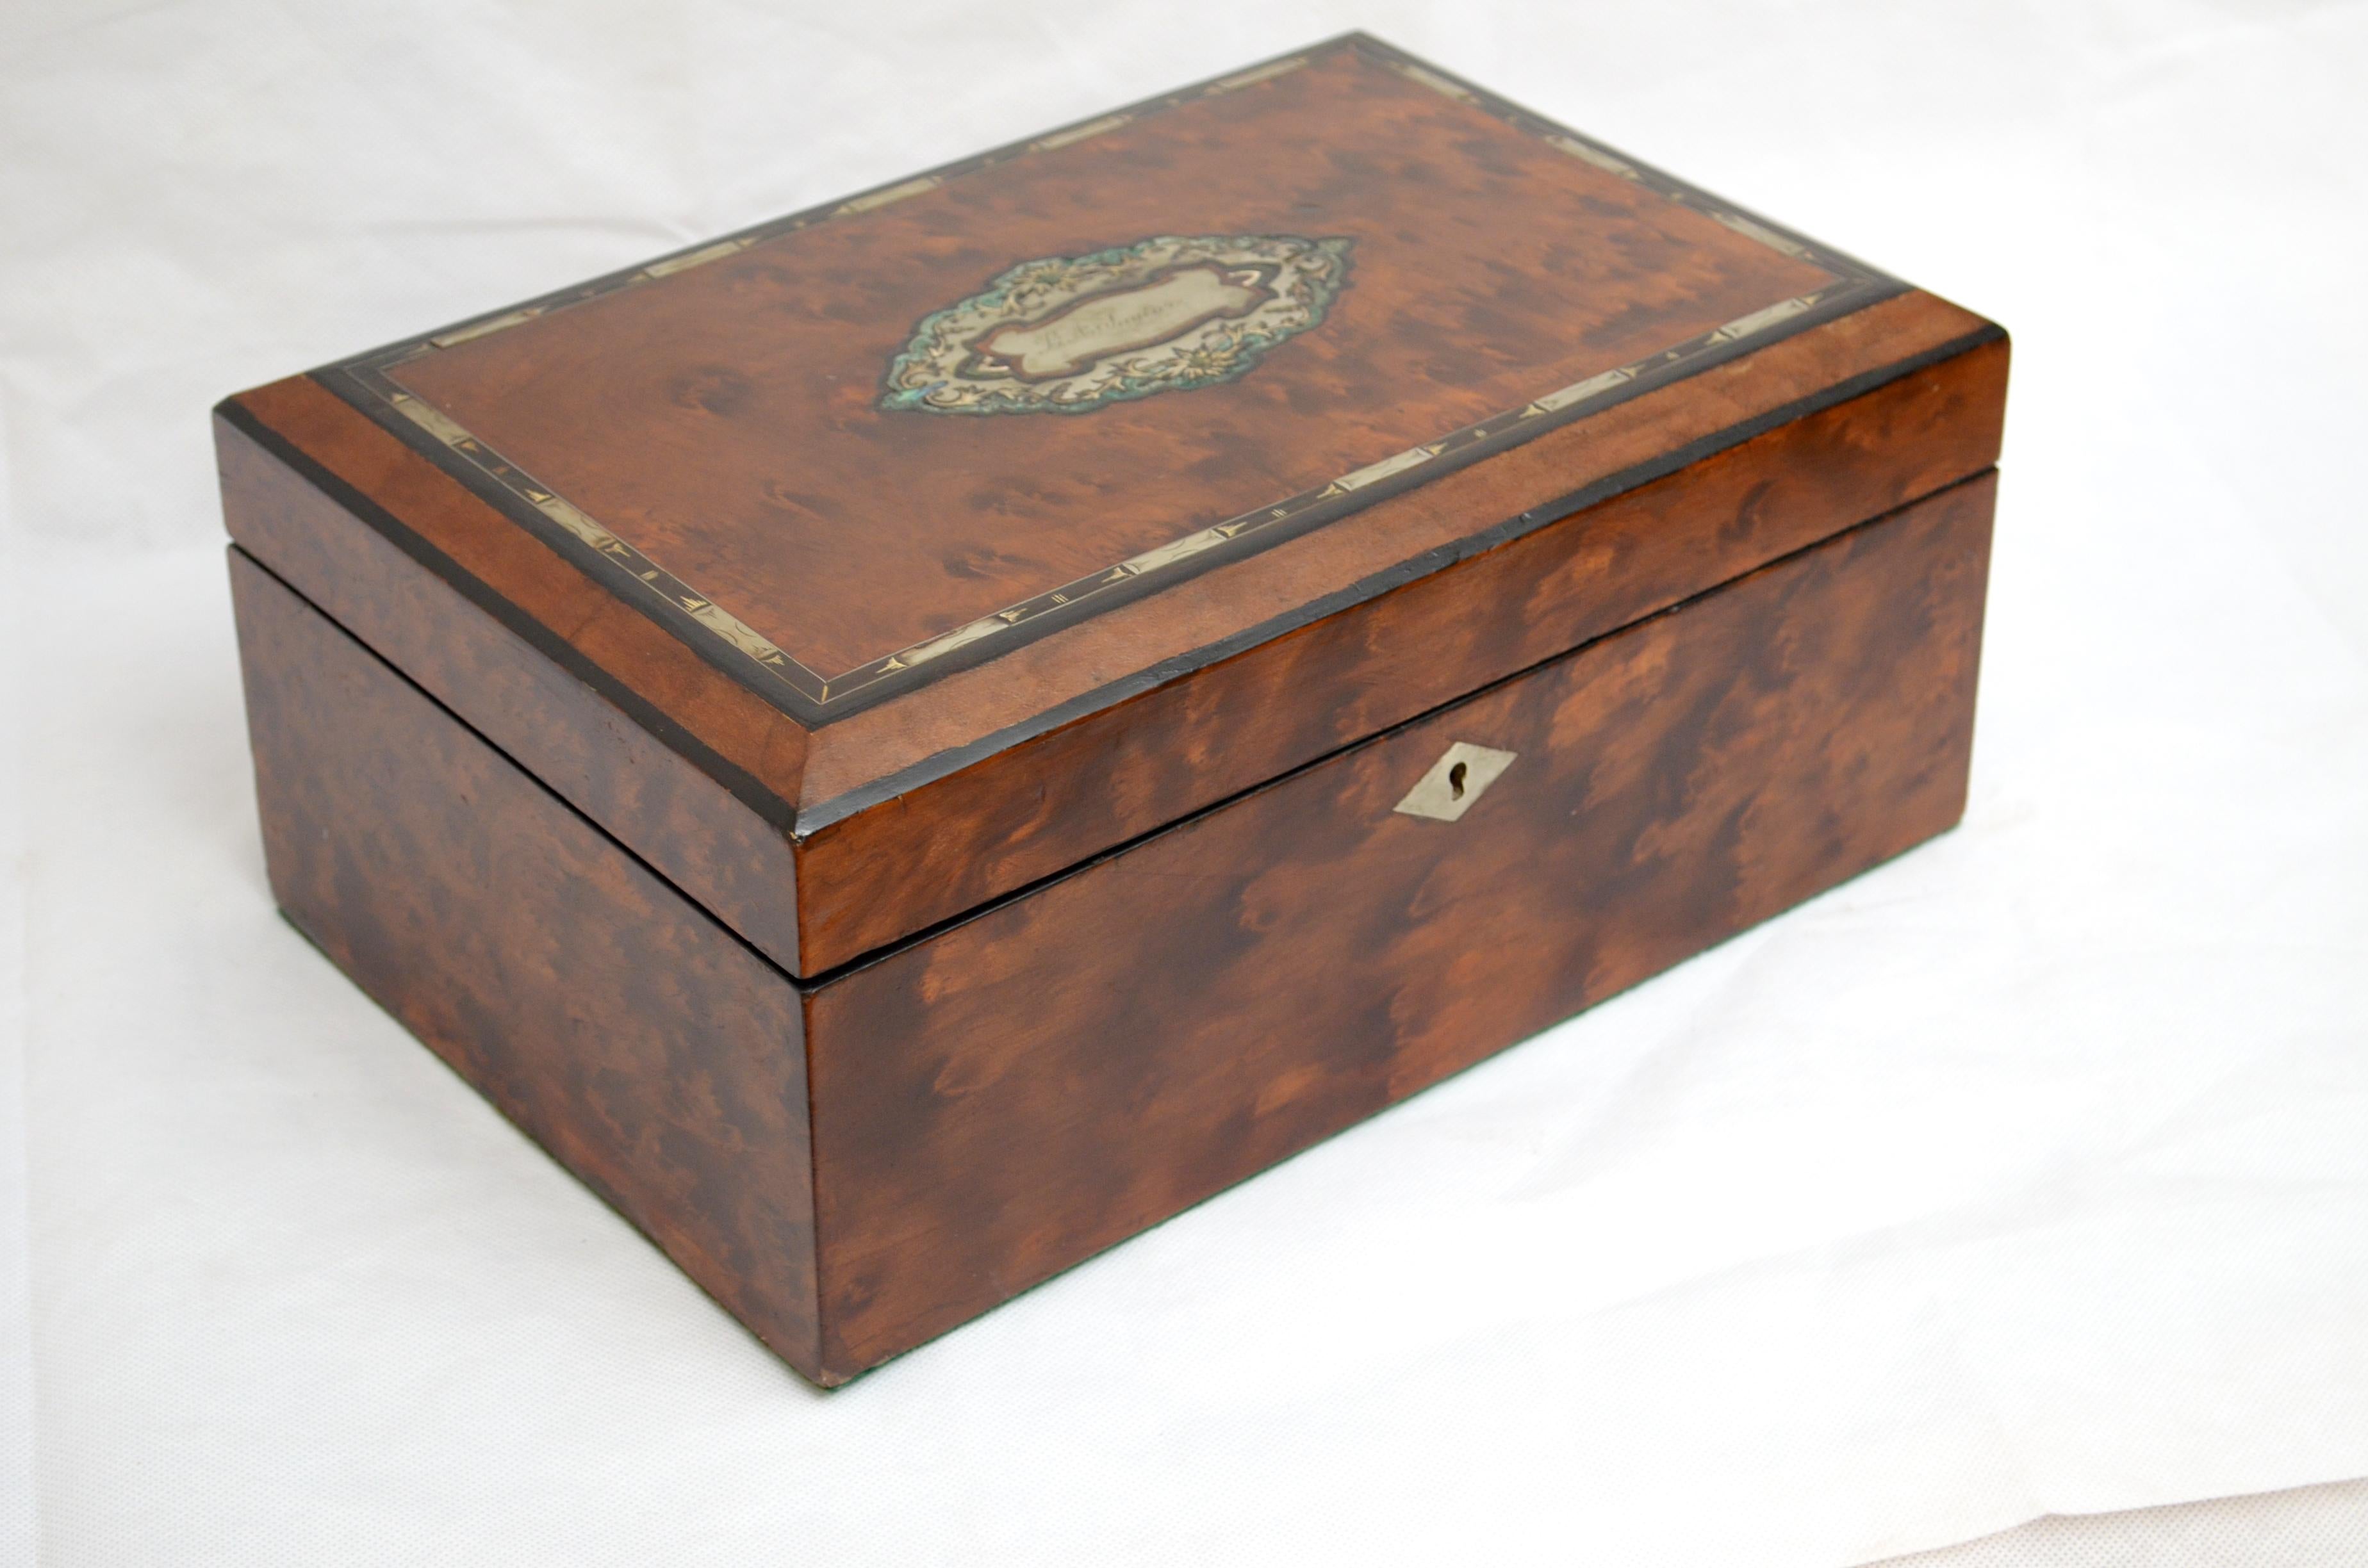 K0480 superb Victorian thuyawood jewelry box, having finely inlaid hinged lid enclosing newly lined interior with lift up tray. This antique box has been sympathetically restored and is in home ready condition. UK shipping included, circa